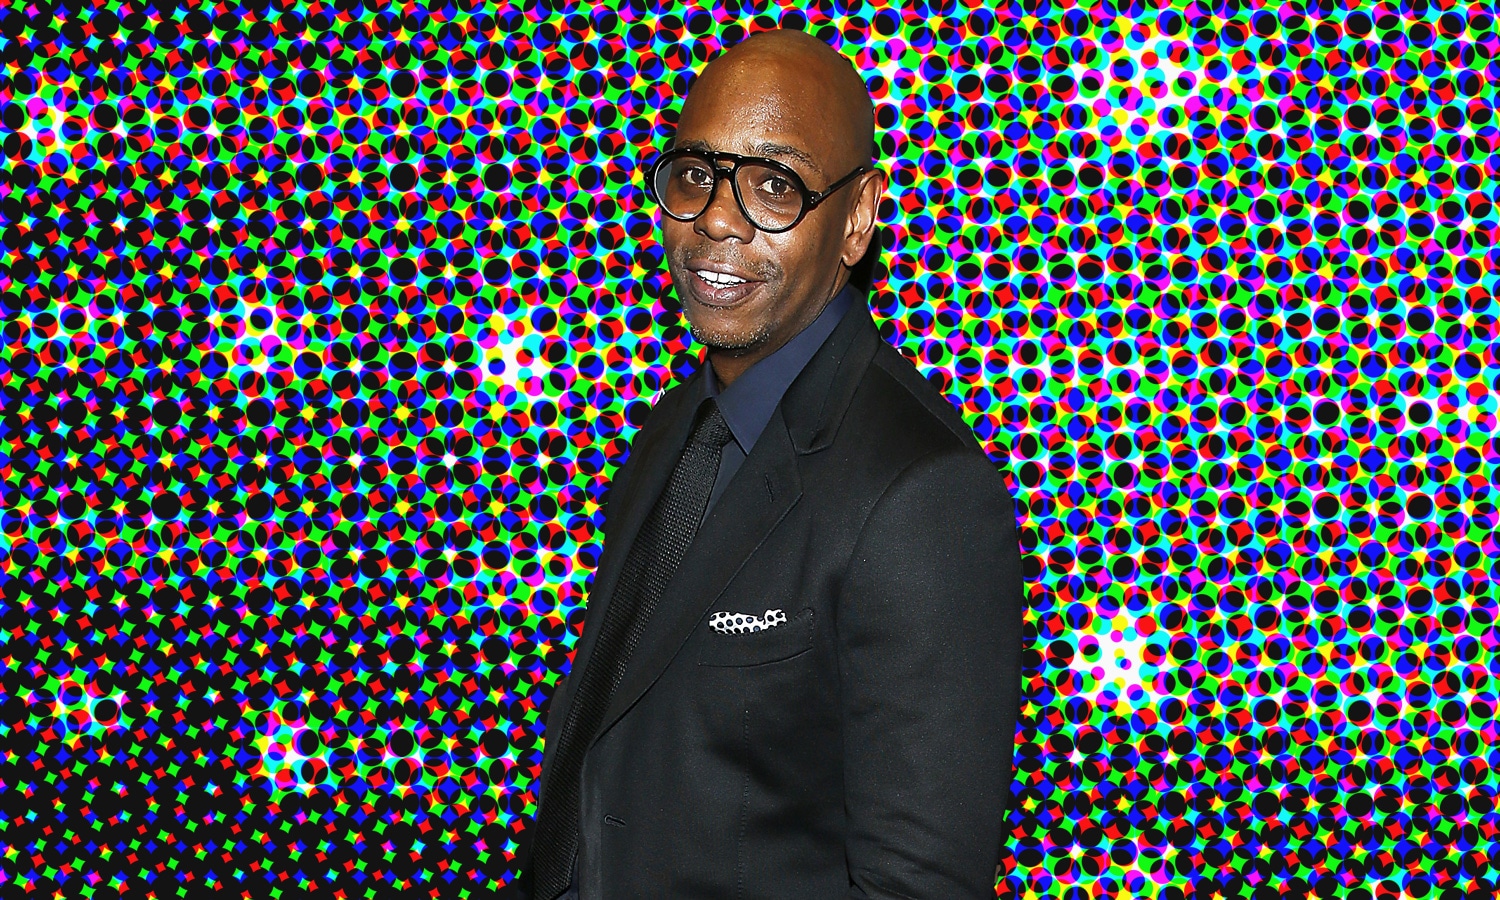 Dave Chappelle Apparently Hates Sharing His Weed